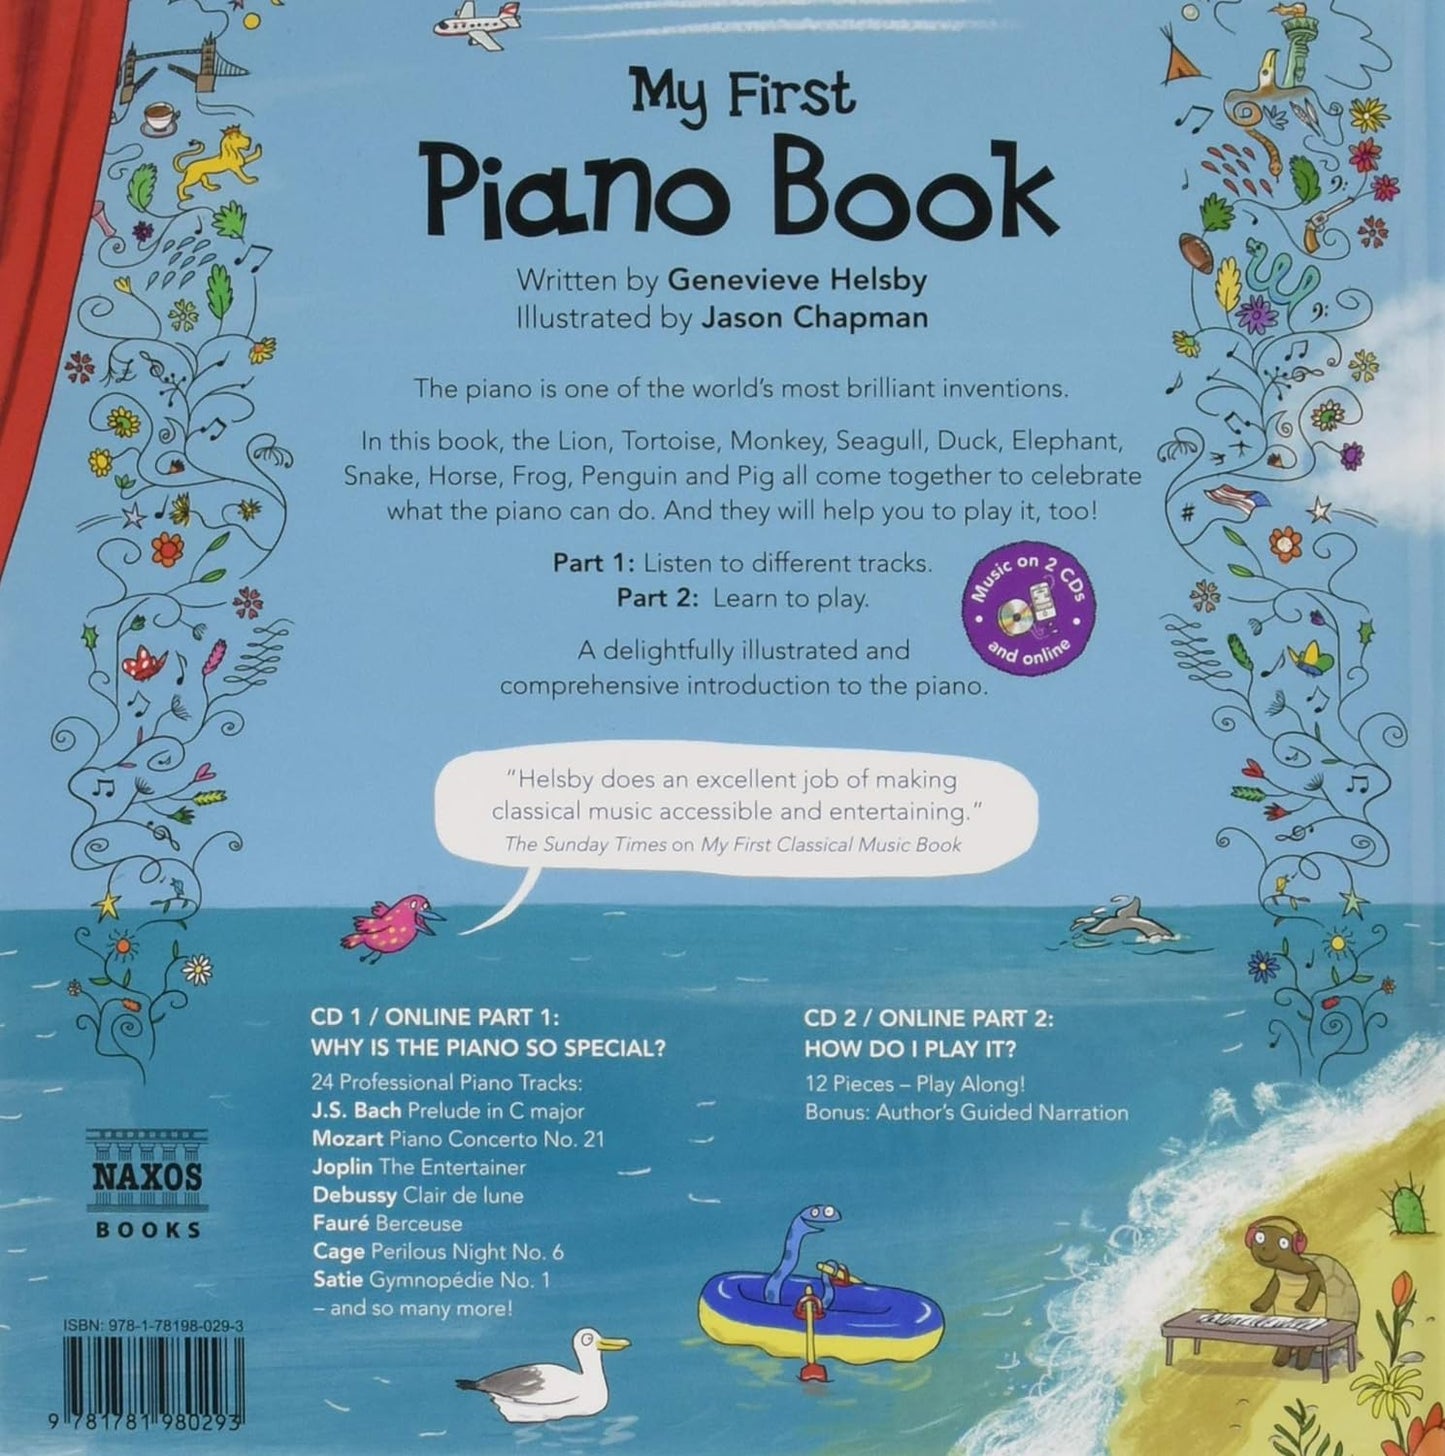 My First Piano Book (includes CD)